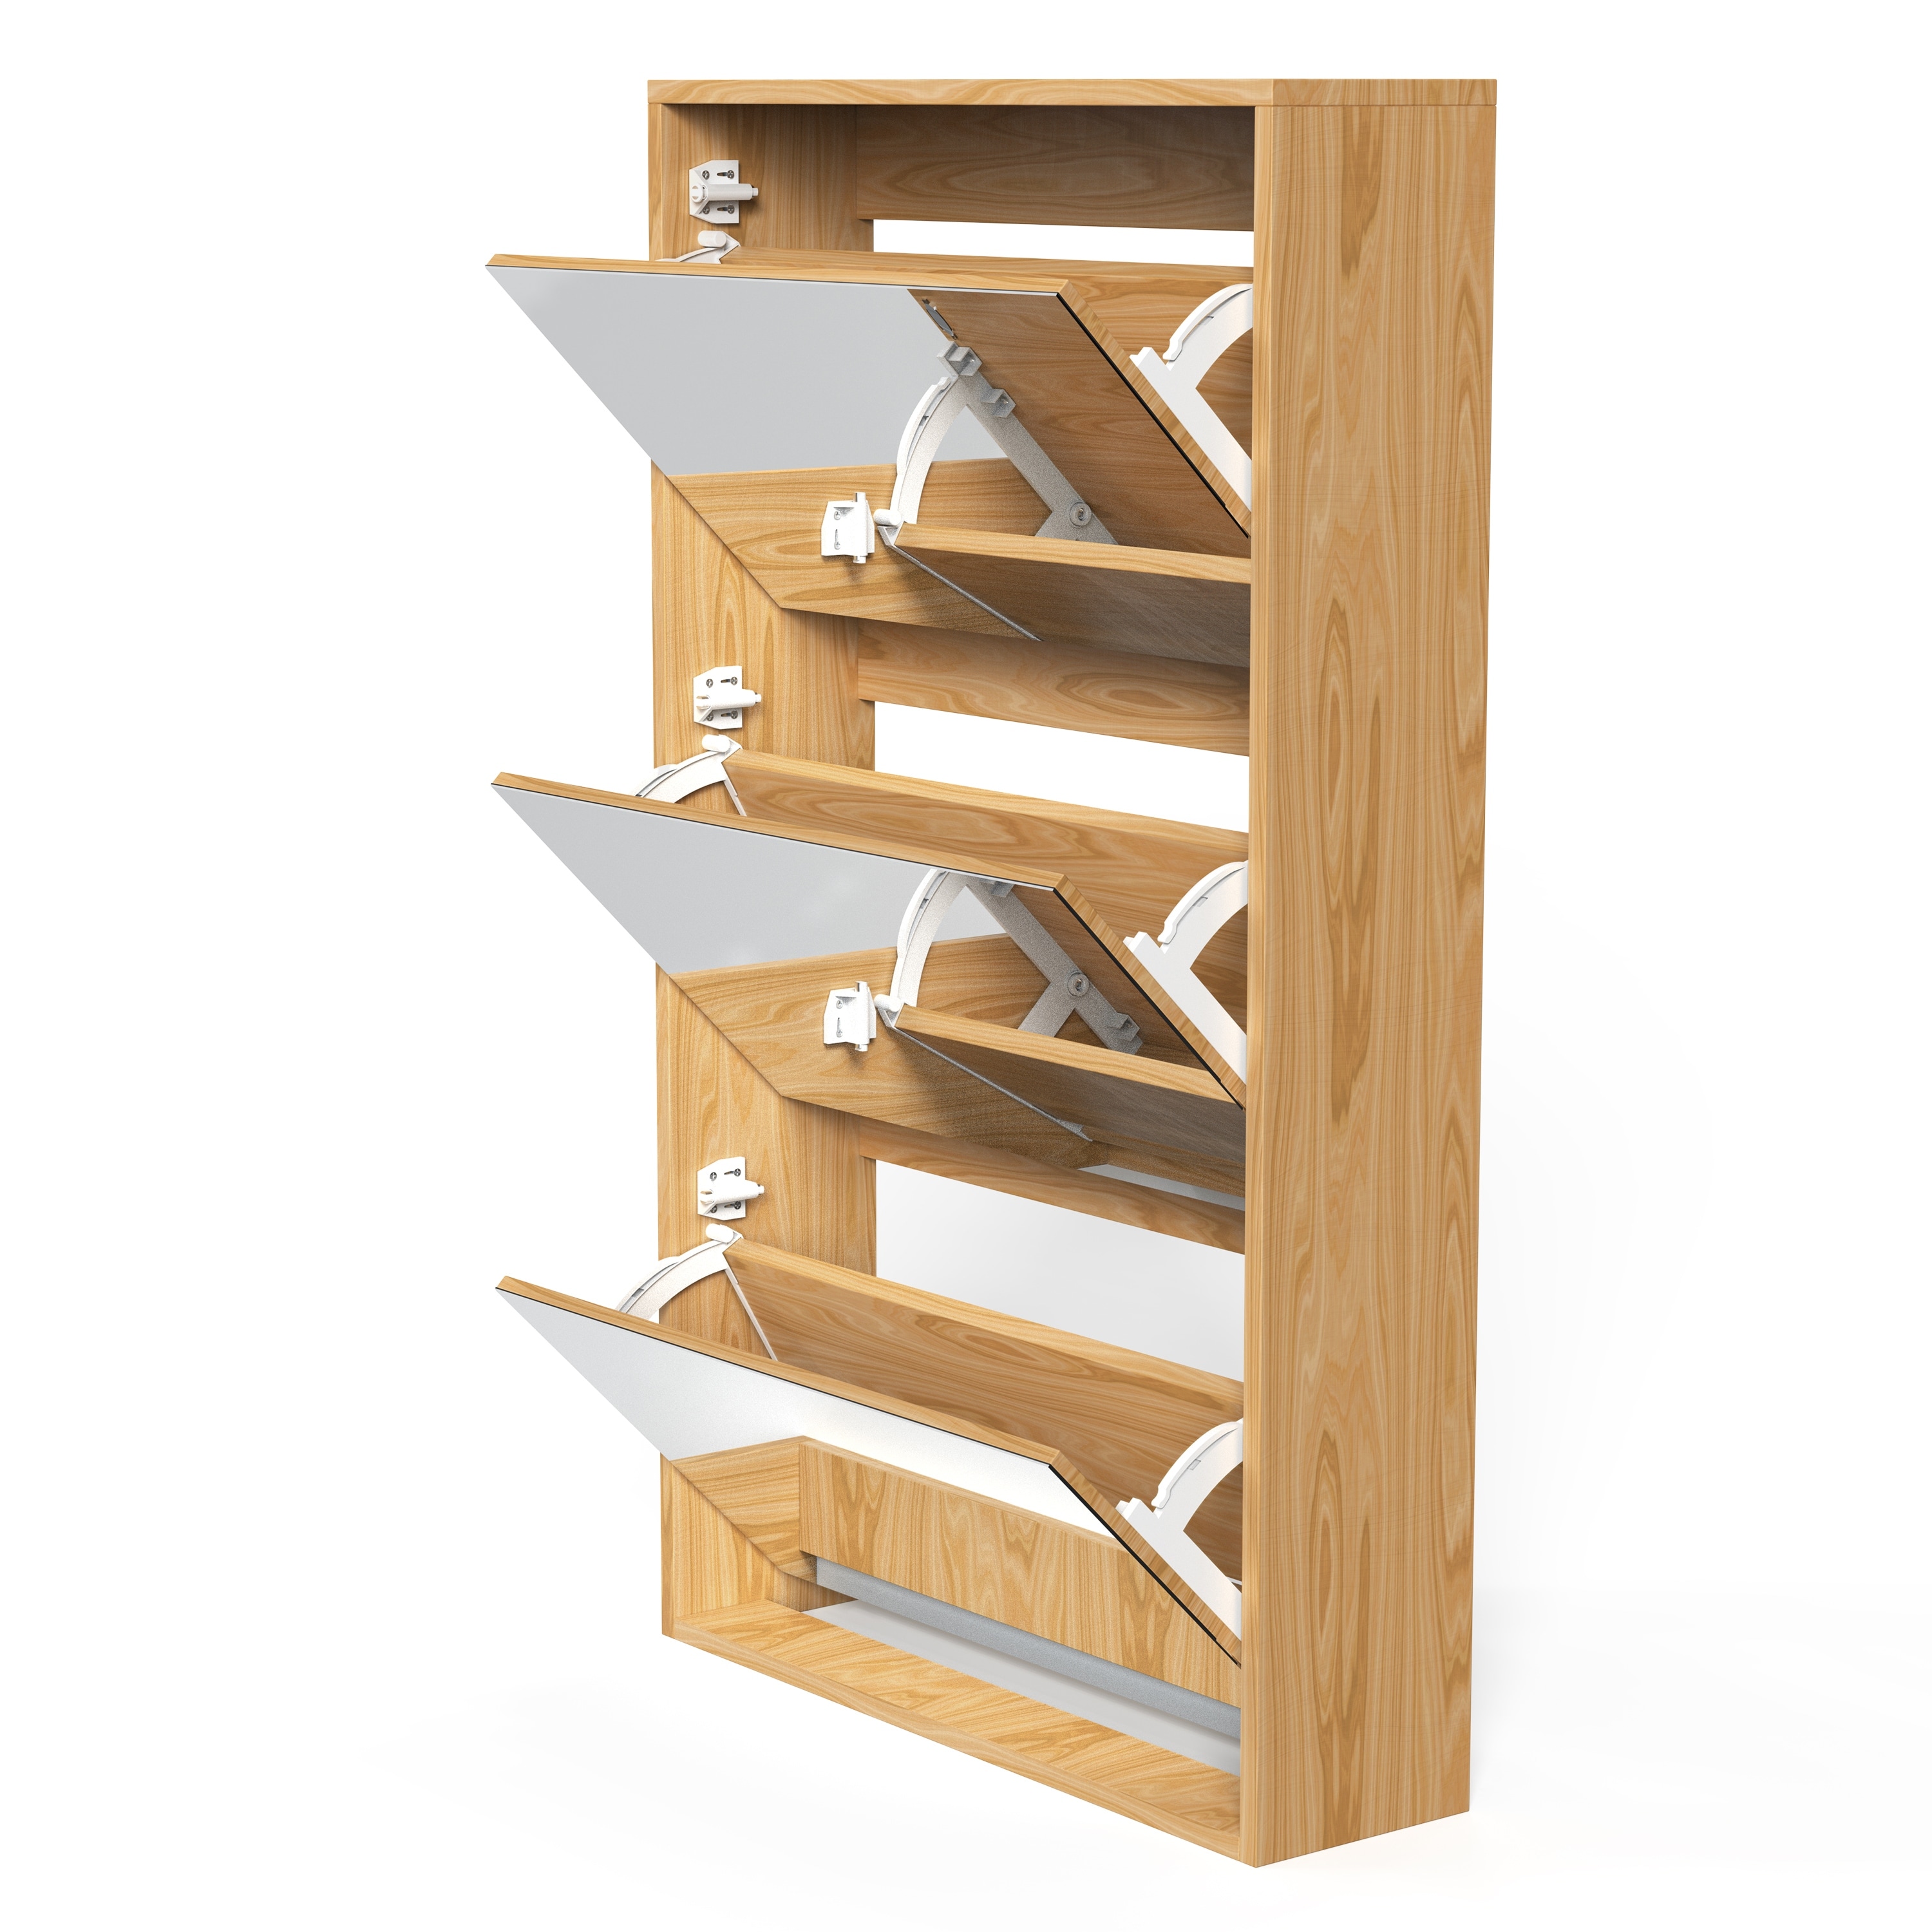 https://ak1.ostkcdn.com/images/products/is/images/direct/4415214c59285228157d032e91fe98d7c1d27bc3/Modern-Shoe-Storage-Cabinet-with-3-Mirror-Flip-Drawers%2CShoe-Storage-Organizer.jpg